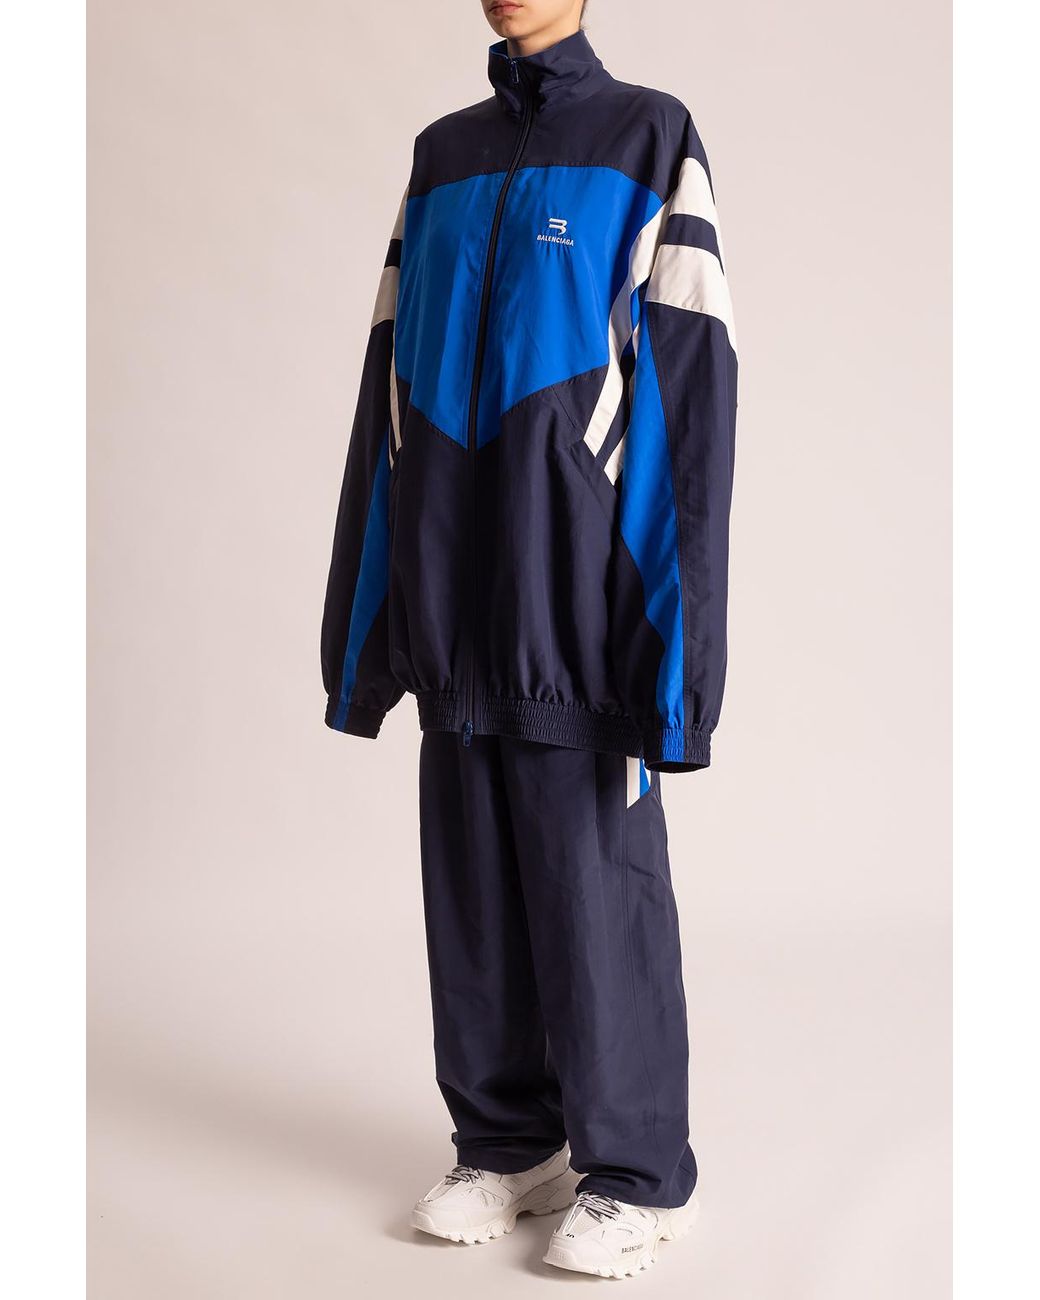 Balenciaga Branded Tracksuit Jacket in Blue | Lyst